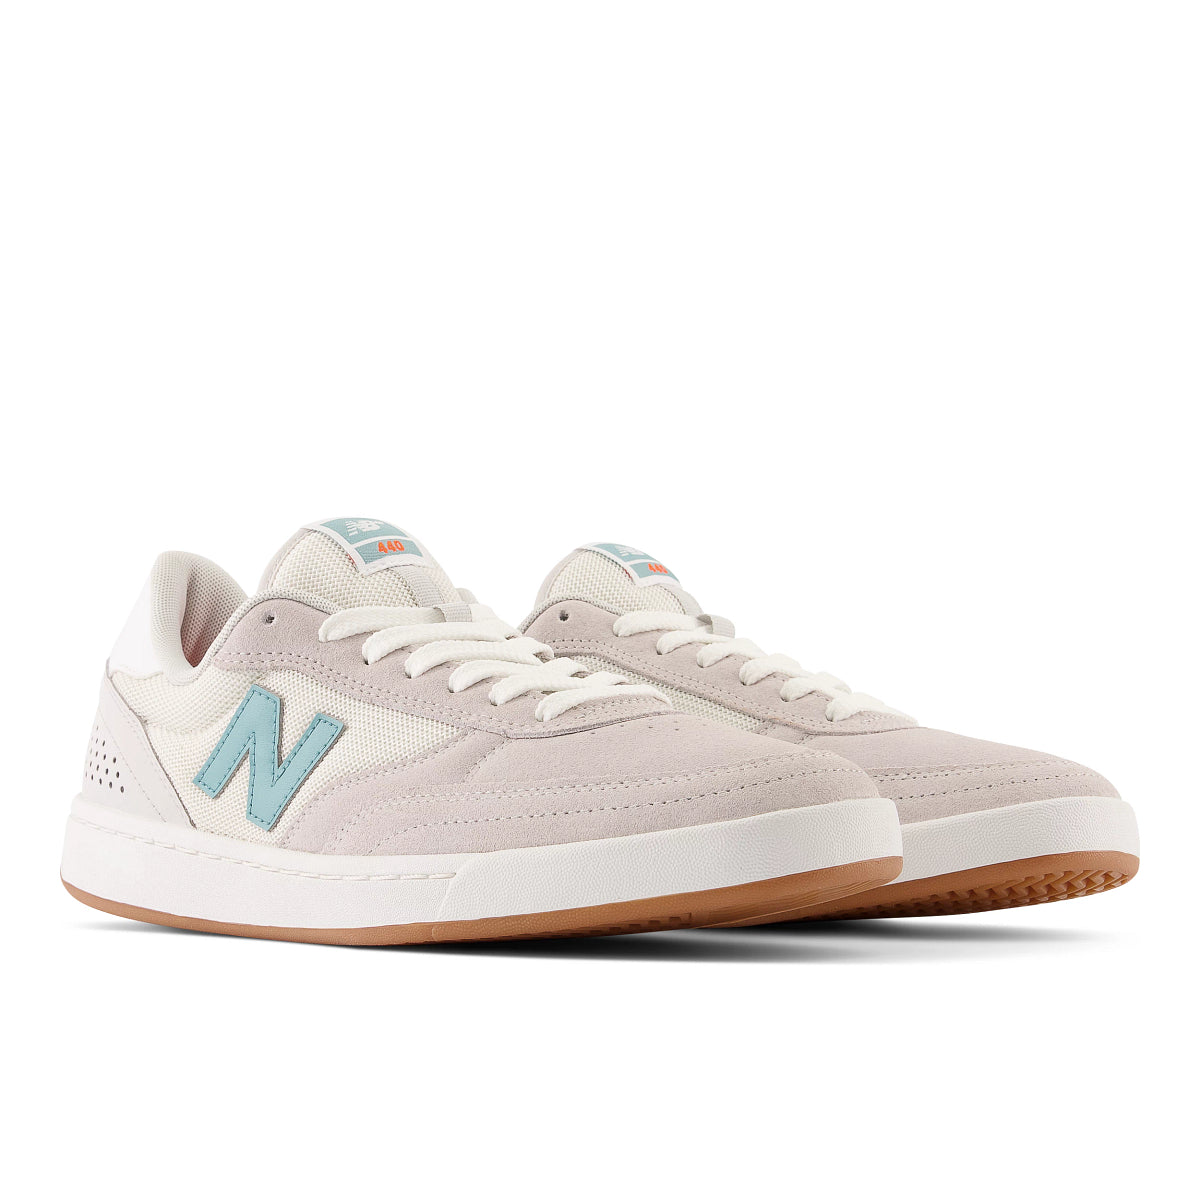 Grey/Teal New Balance Numeric 440 Shoes